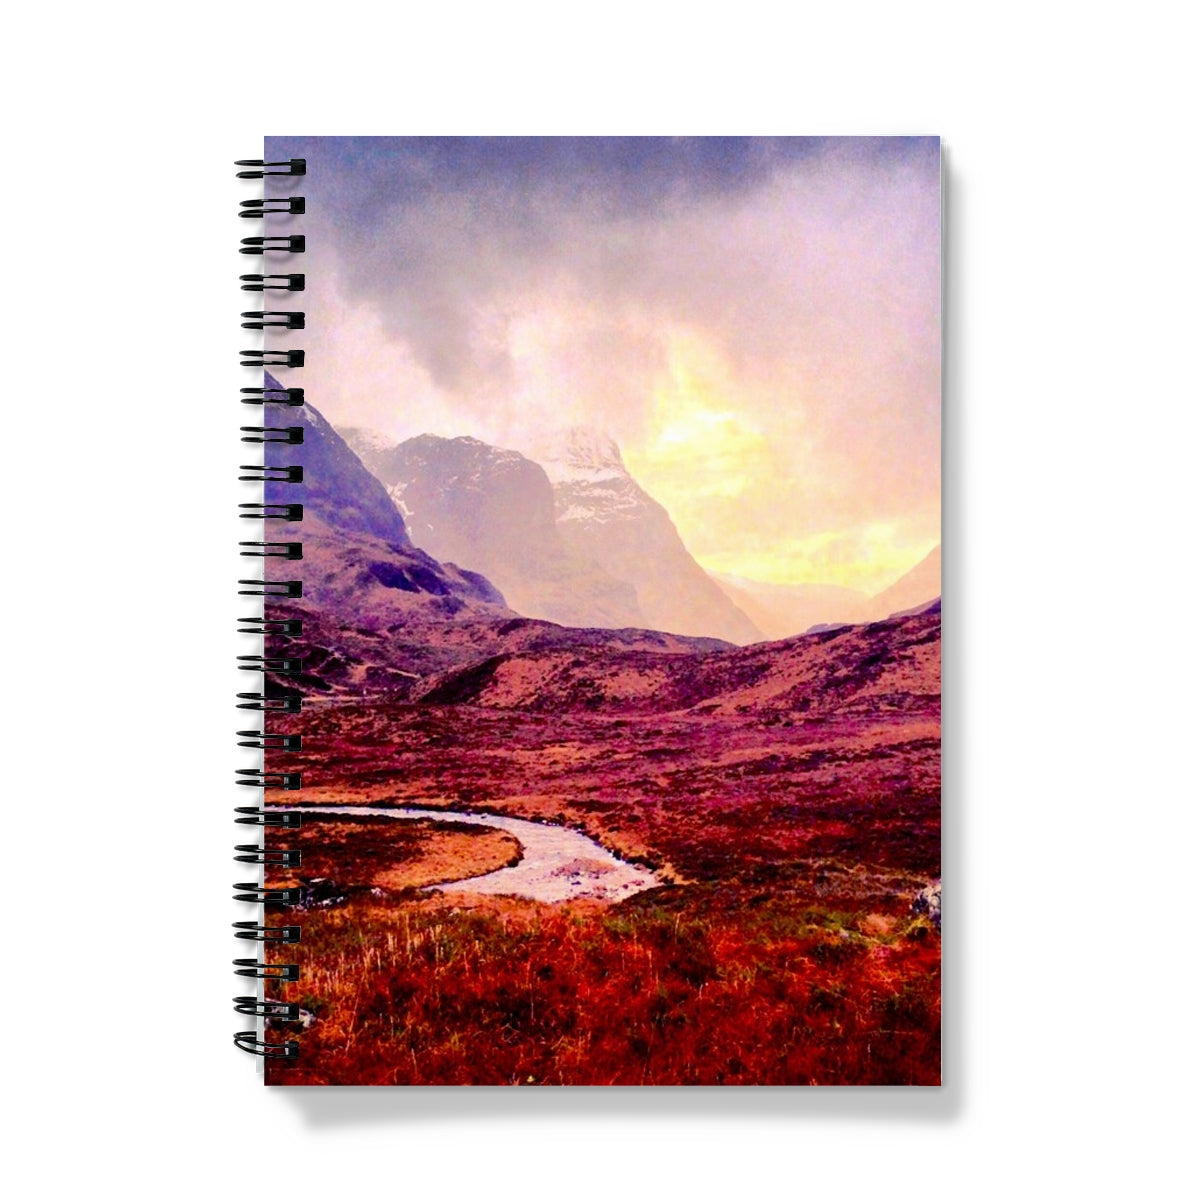 A Brooding Glencoe Art Gifts Notebook-Journals & Notebooks-Glencoe Art Gallery-A4-Graph-Paintings, Prints, Homeware, Art Gifts From Scotland By Scottish Artist Kevin Hunter